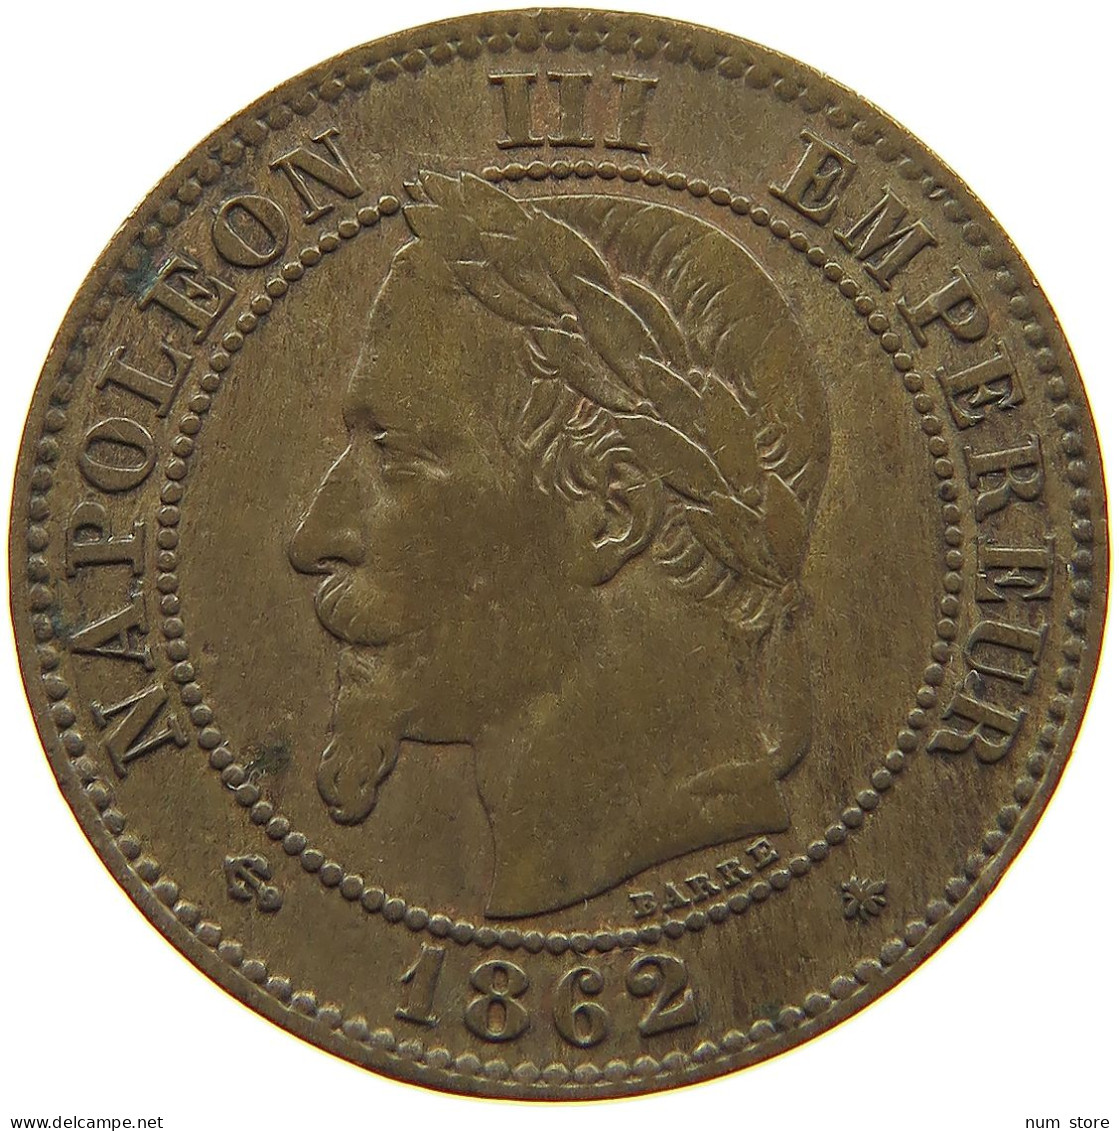 FRANCE 2 CENTIMES 1862 A Napoleon III. (1852-1870) #a012 0547 - 2 Centimes